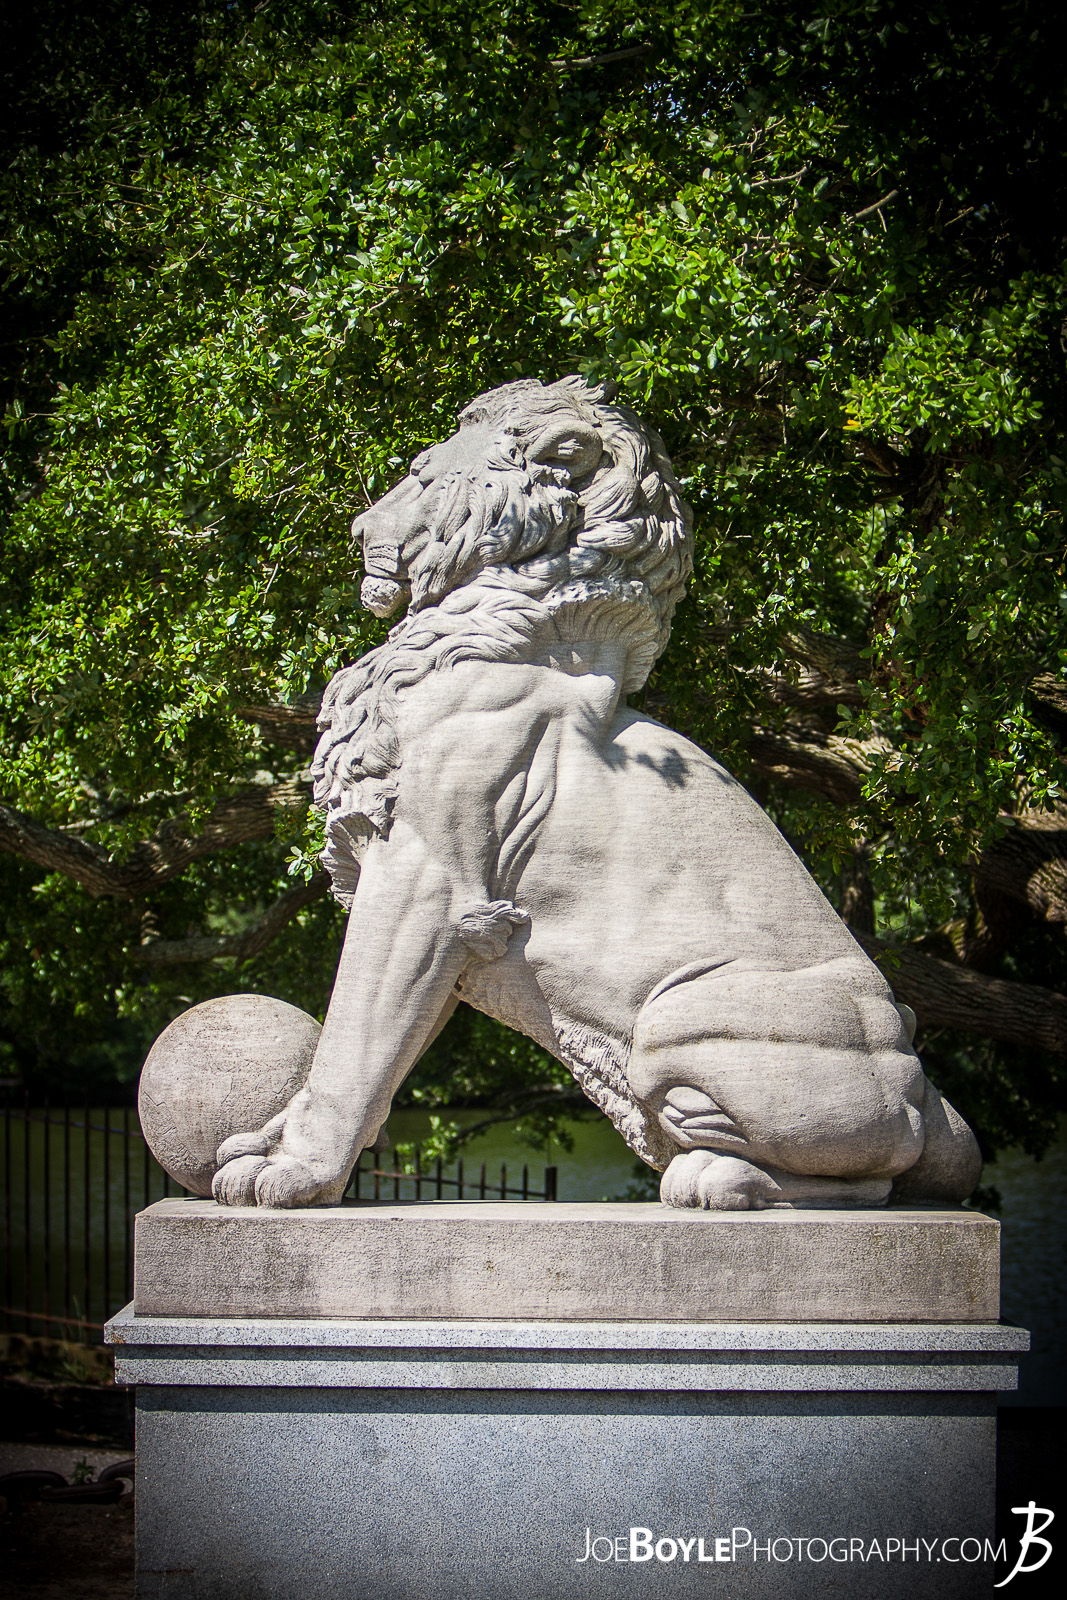  When I was visiting friends in Virginia this past summer we made it a point to see some of the historical sites in the area. One of which included the Mariner's Museum. This is an image of 1 of the 4 Lion Statues on the bridge, which is really a dam that creates Lake Maury and provides a great view of the James River. 